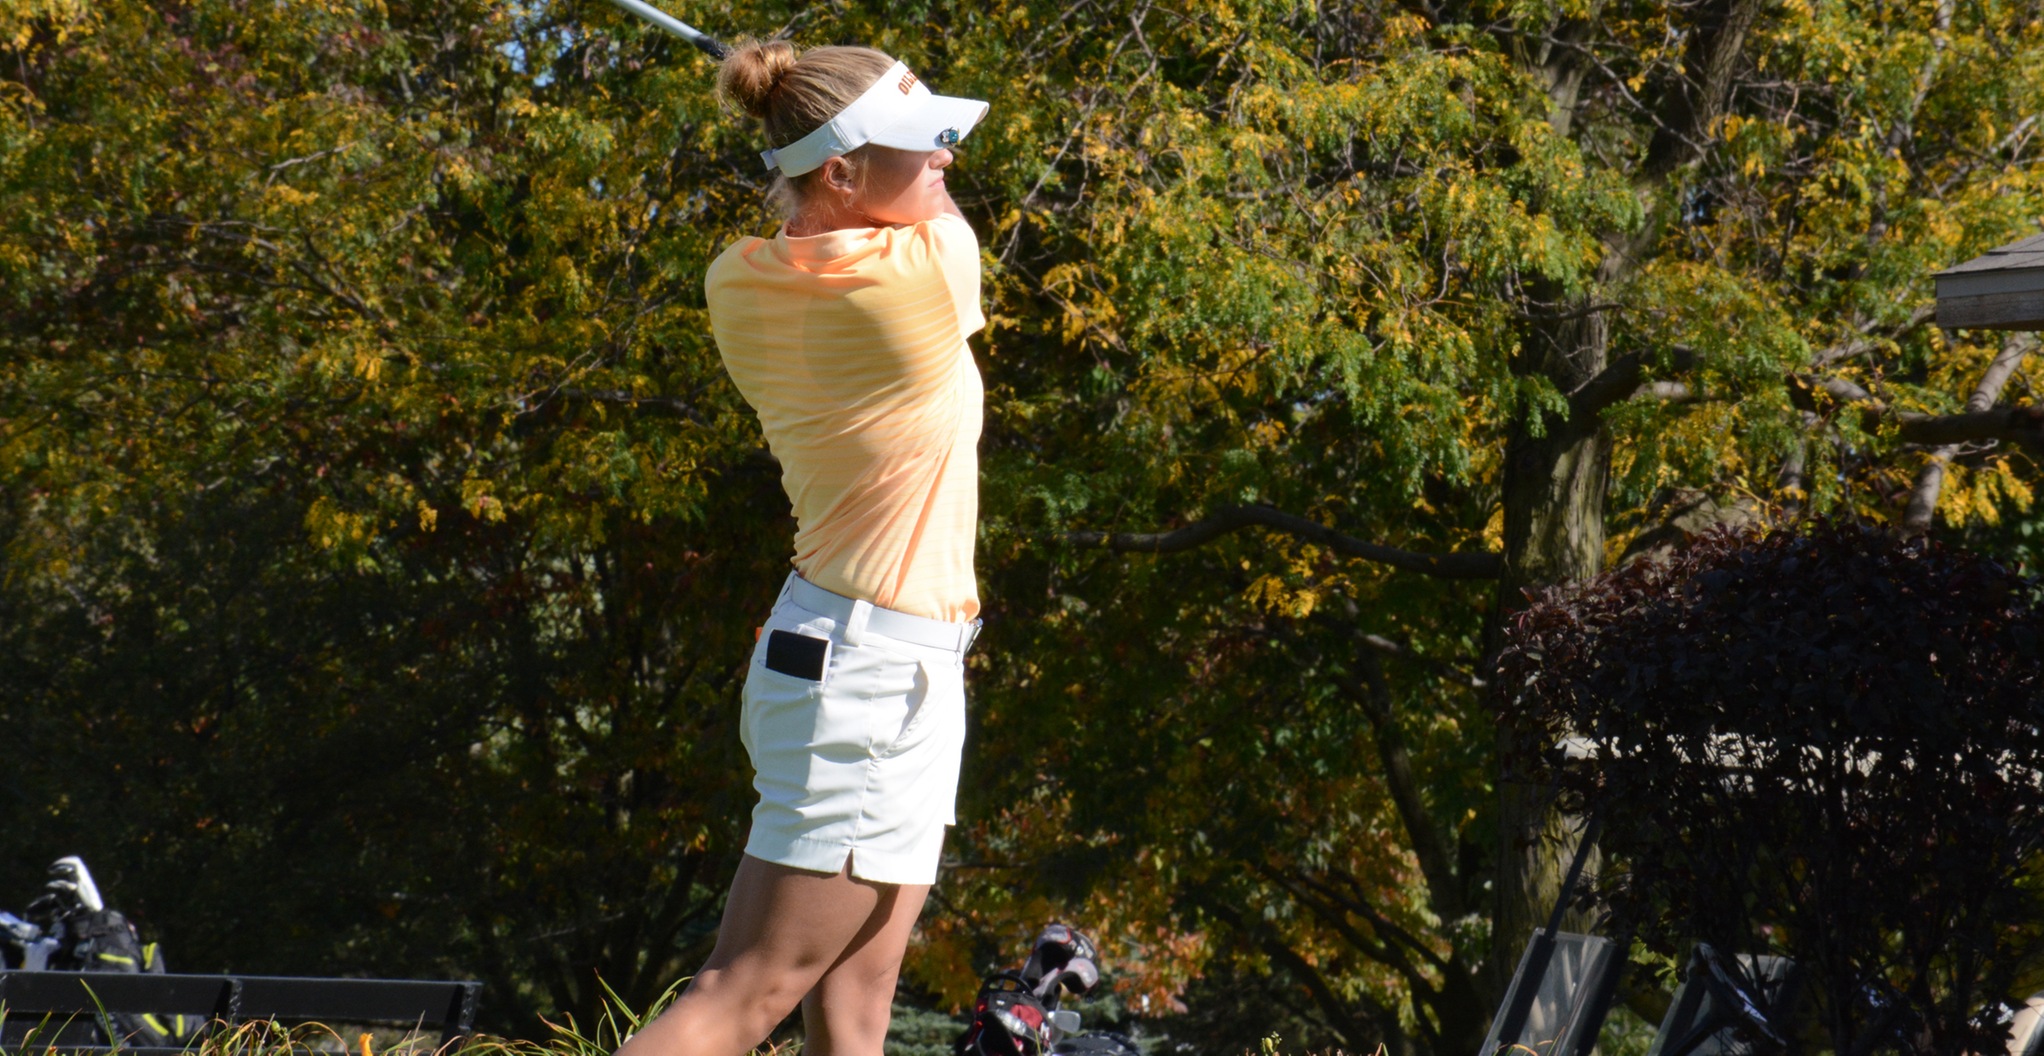 Oilers Go Low | Lead G-MAC Fall Invite by 28 Strokes